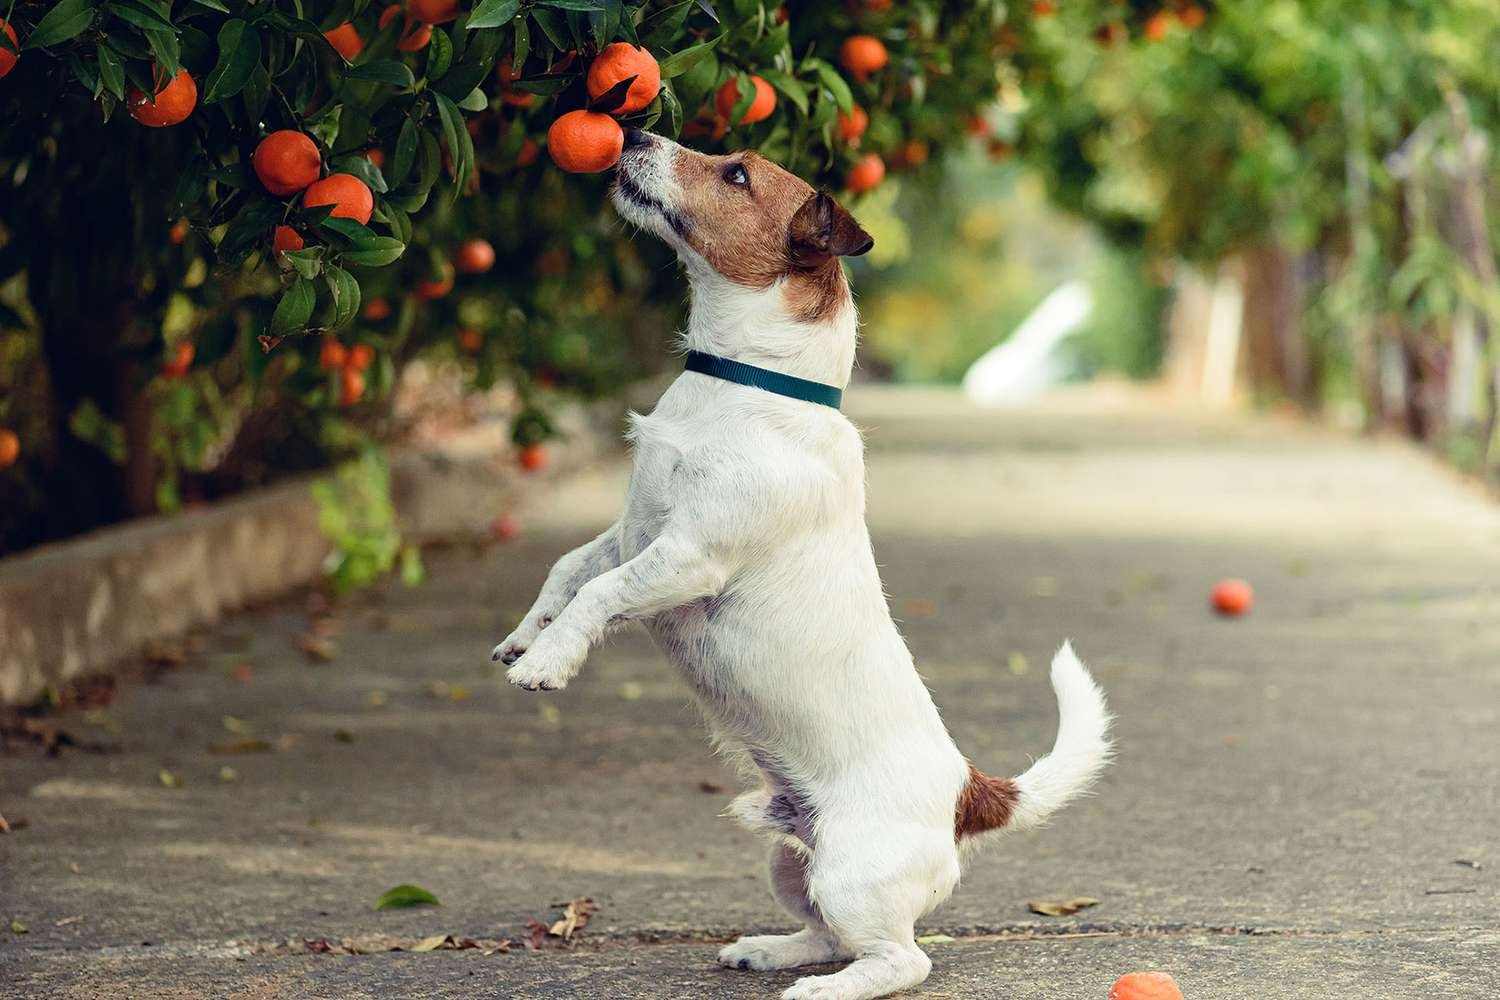 Can Dogs Eat Oranges? How To Safely Feed Your Dog a Citrus Snack